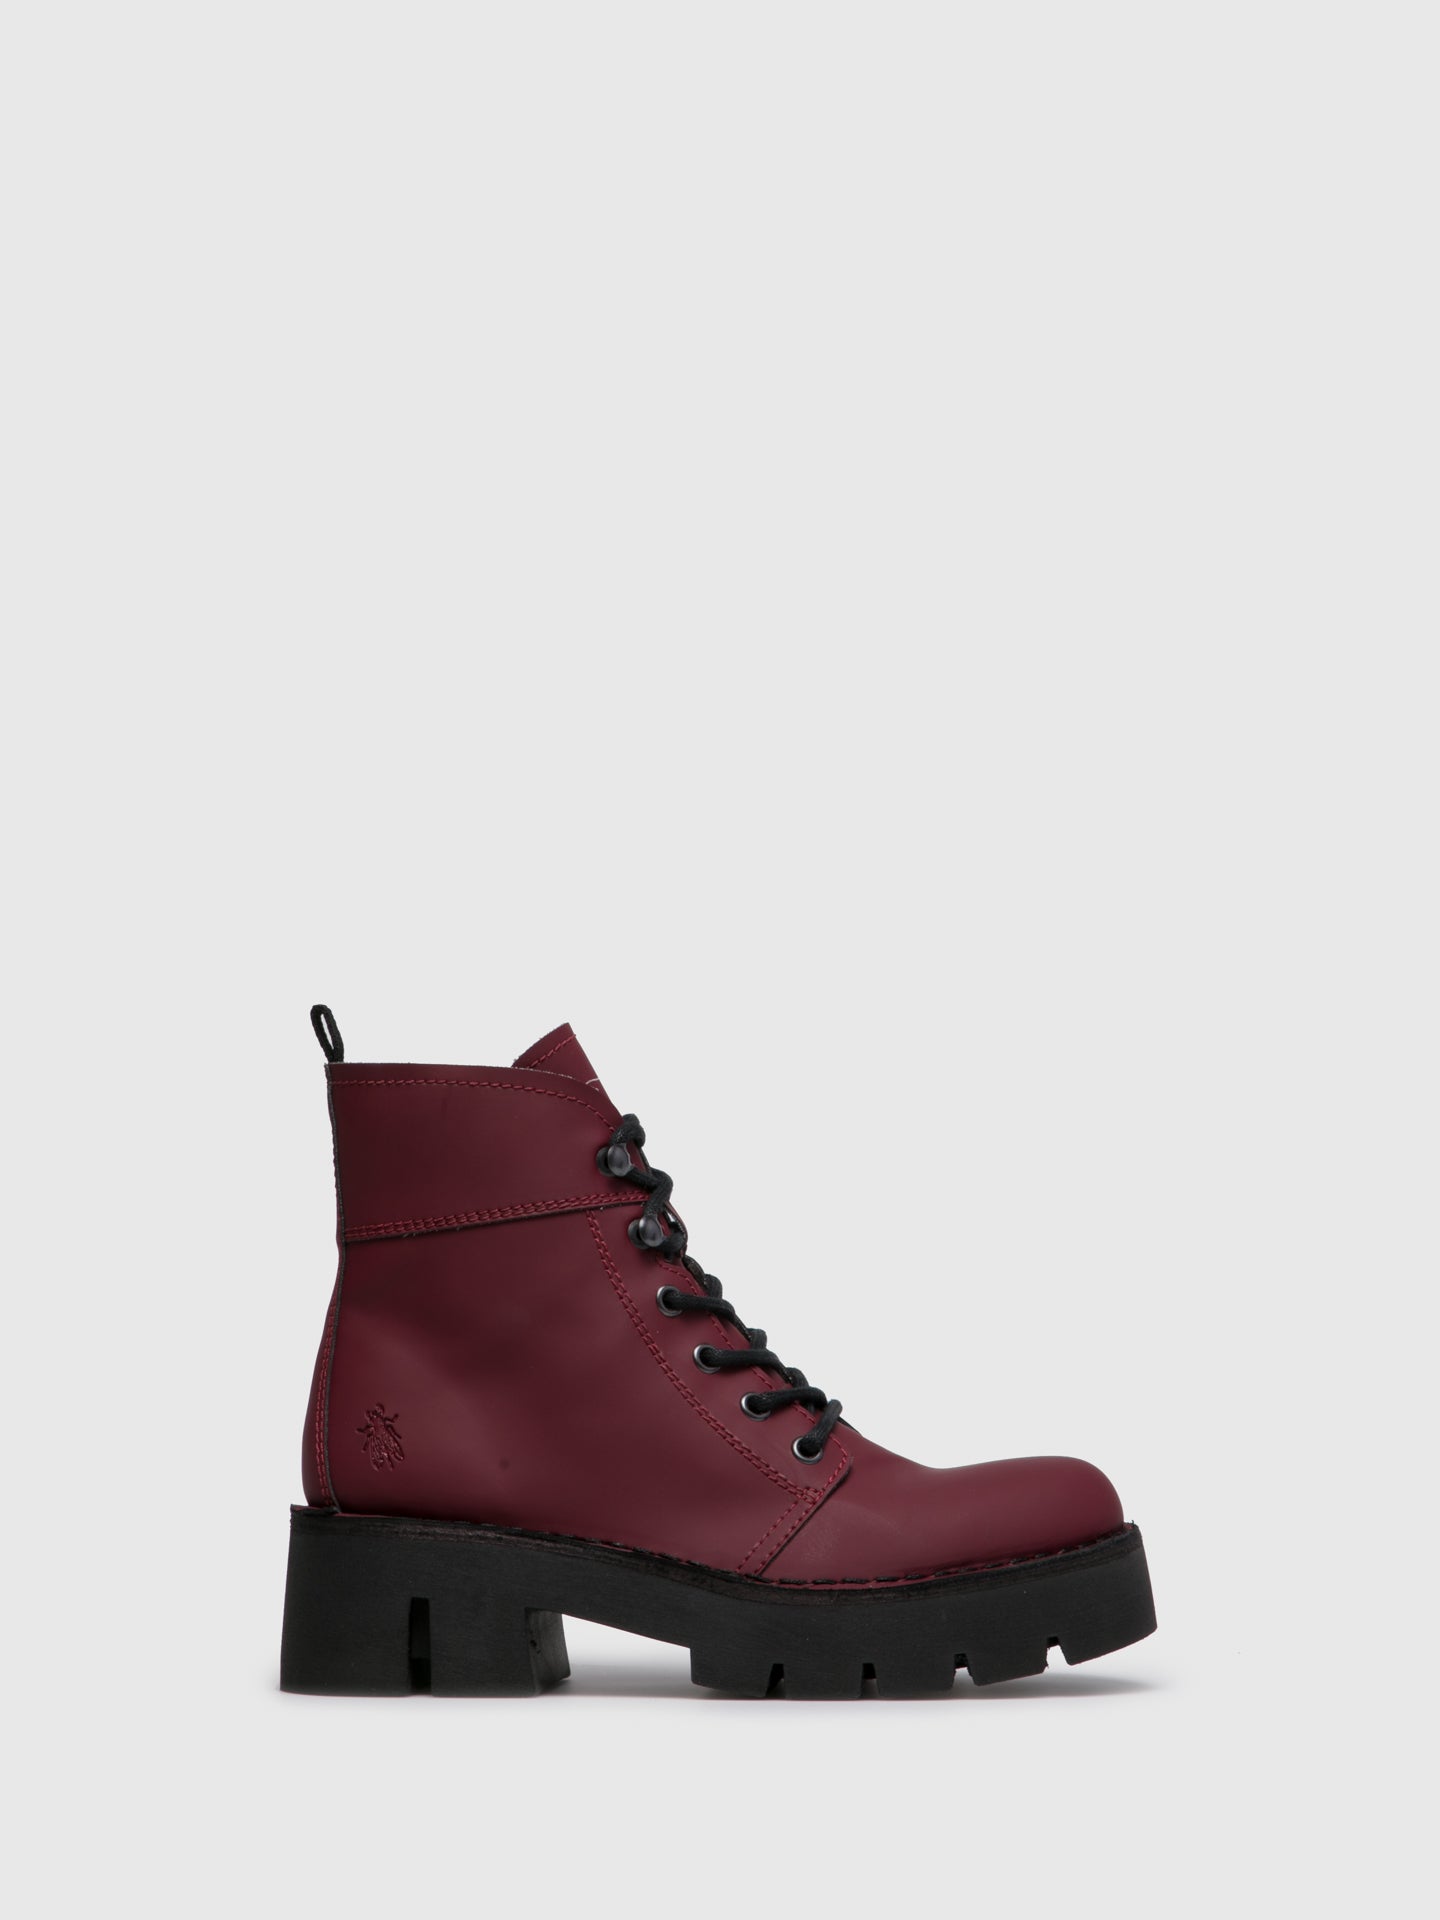 Fly London DarkRed Lace-up Ankle Boots